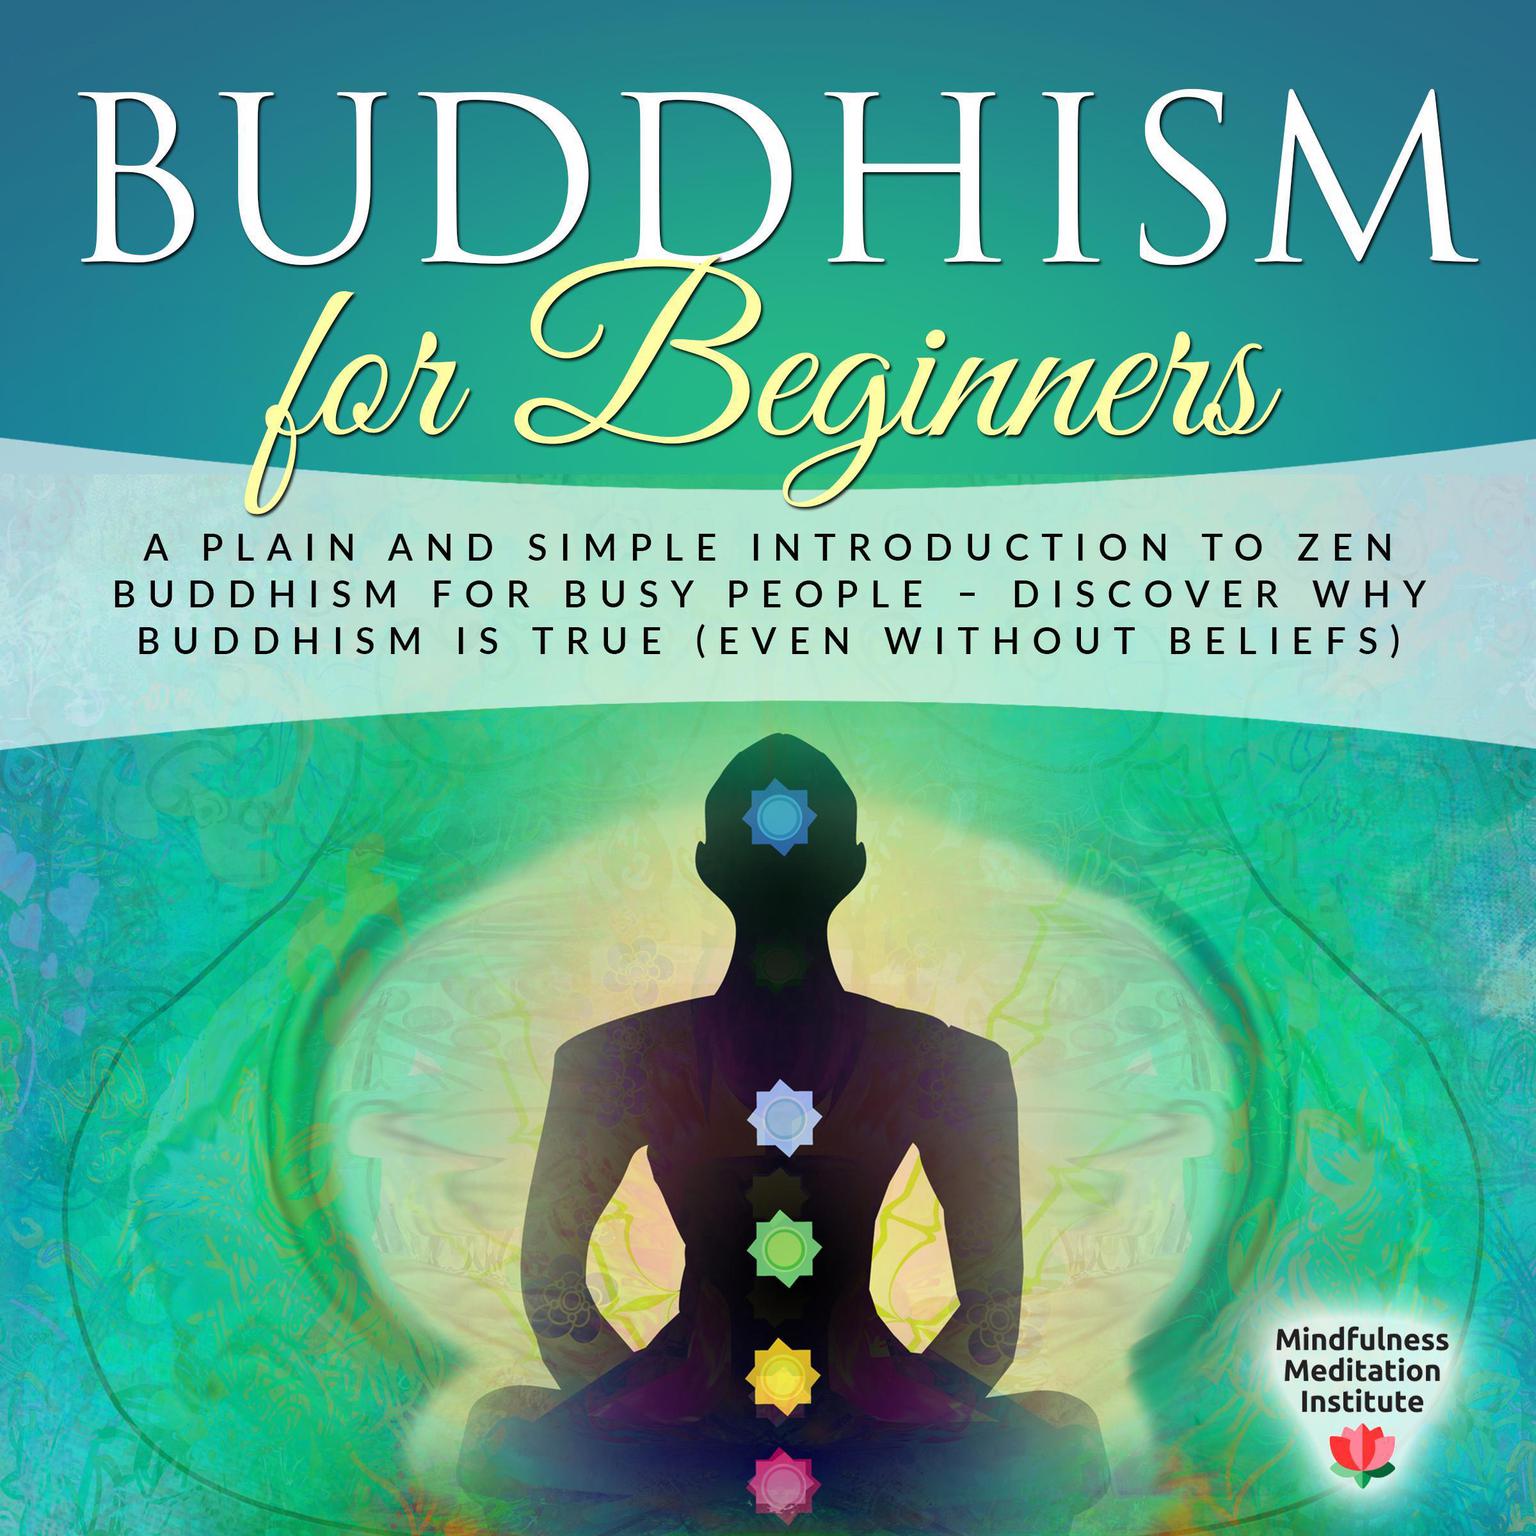 Buddhism for Beginners (Abridged): A Plain and Simple Introduction to Zen Buddhism for Busy People—Discover Why Buddhism is True (Even without Beliefs) (Guided Meditations and Mindfulness) Audiobook, by Mindfulness Meditation Institute